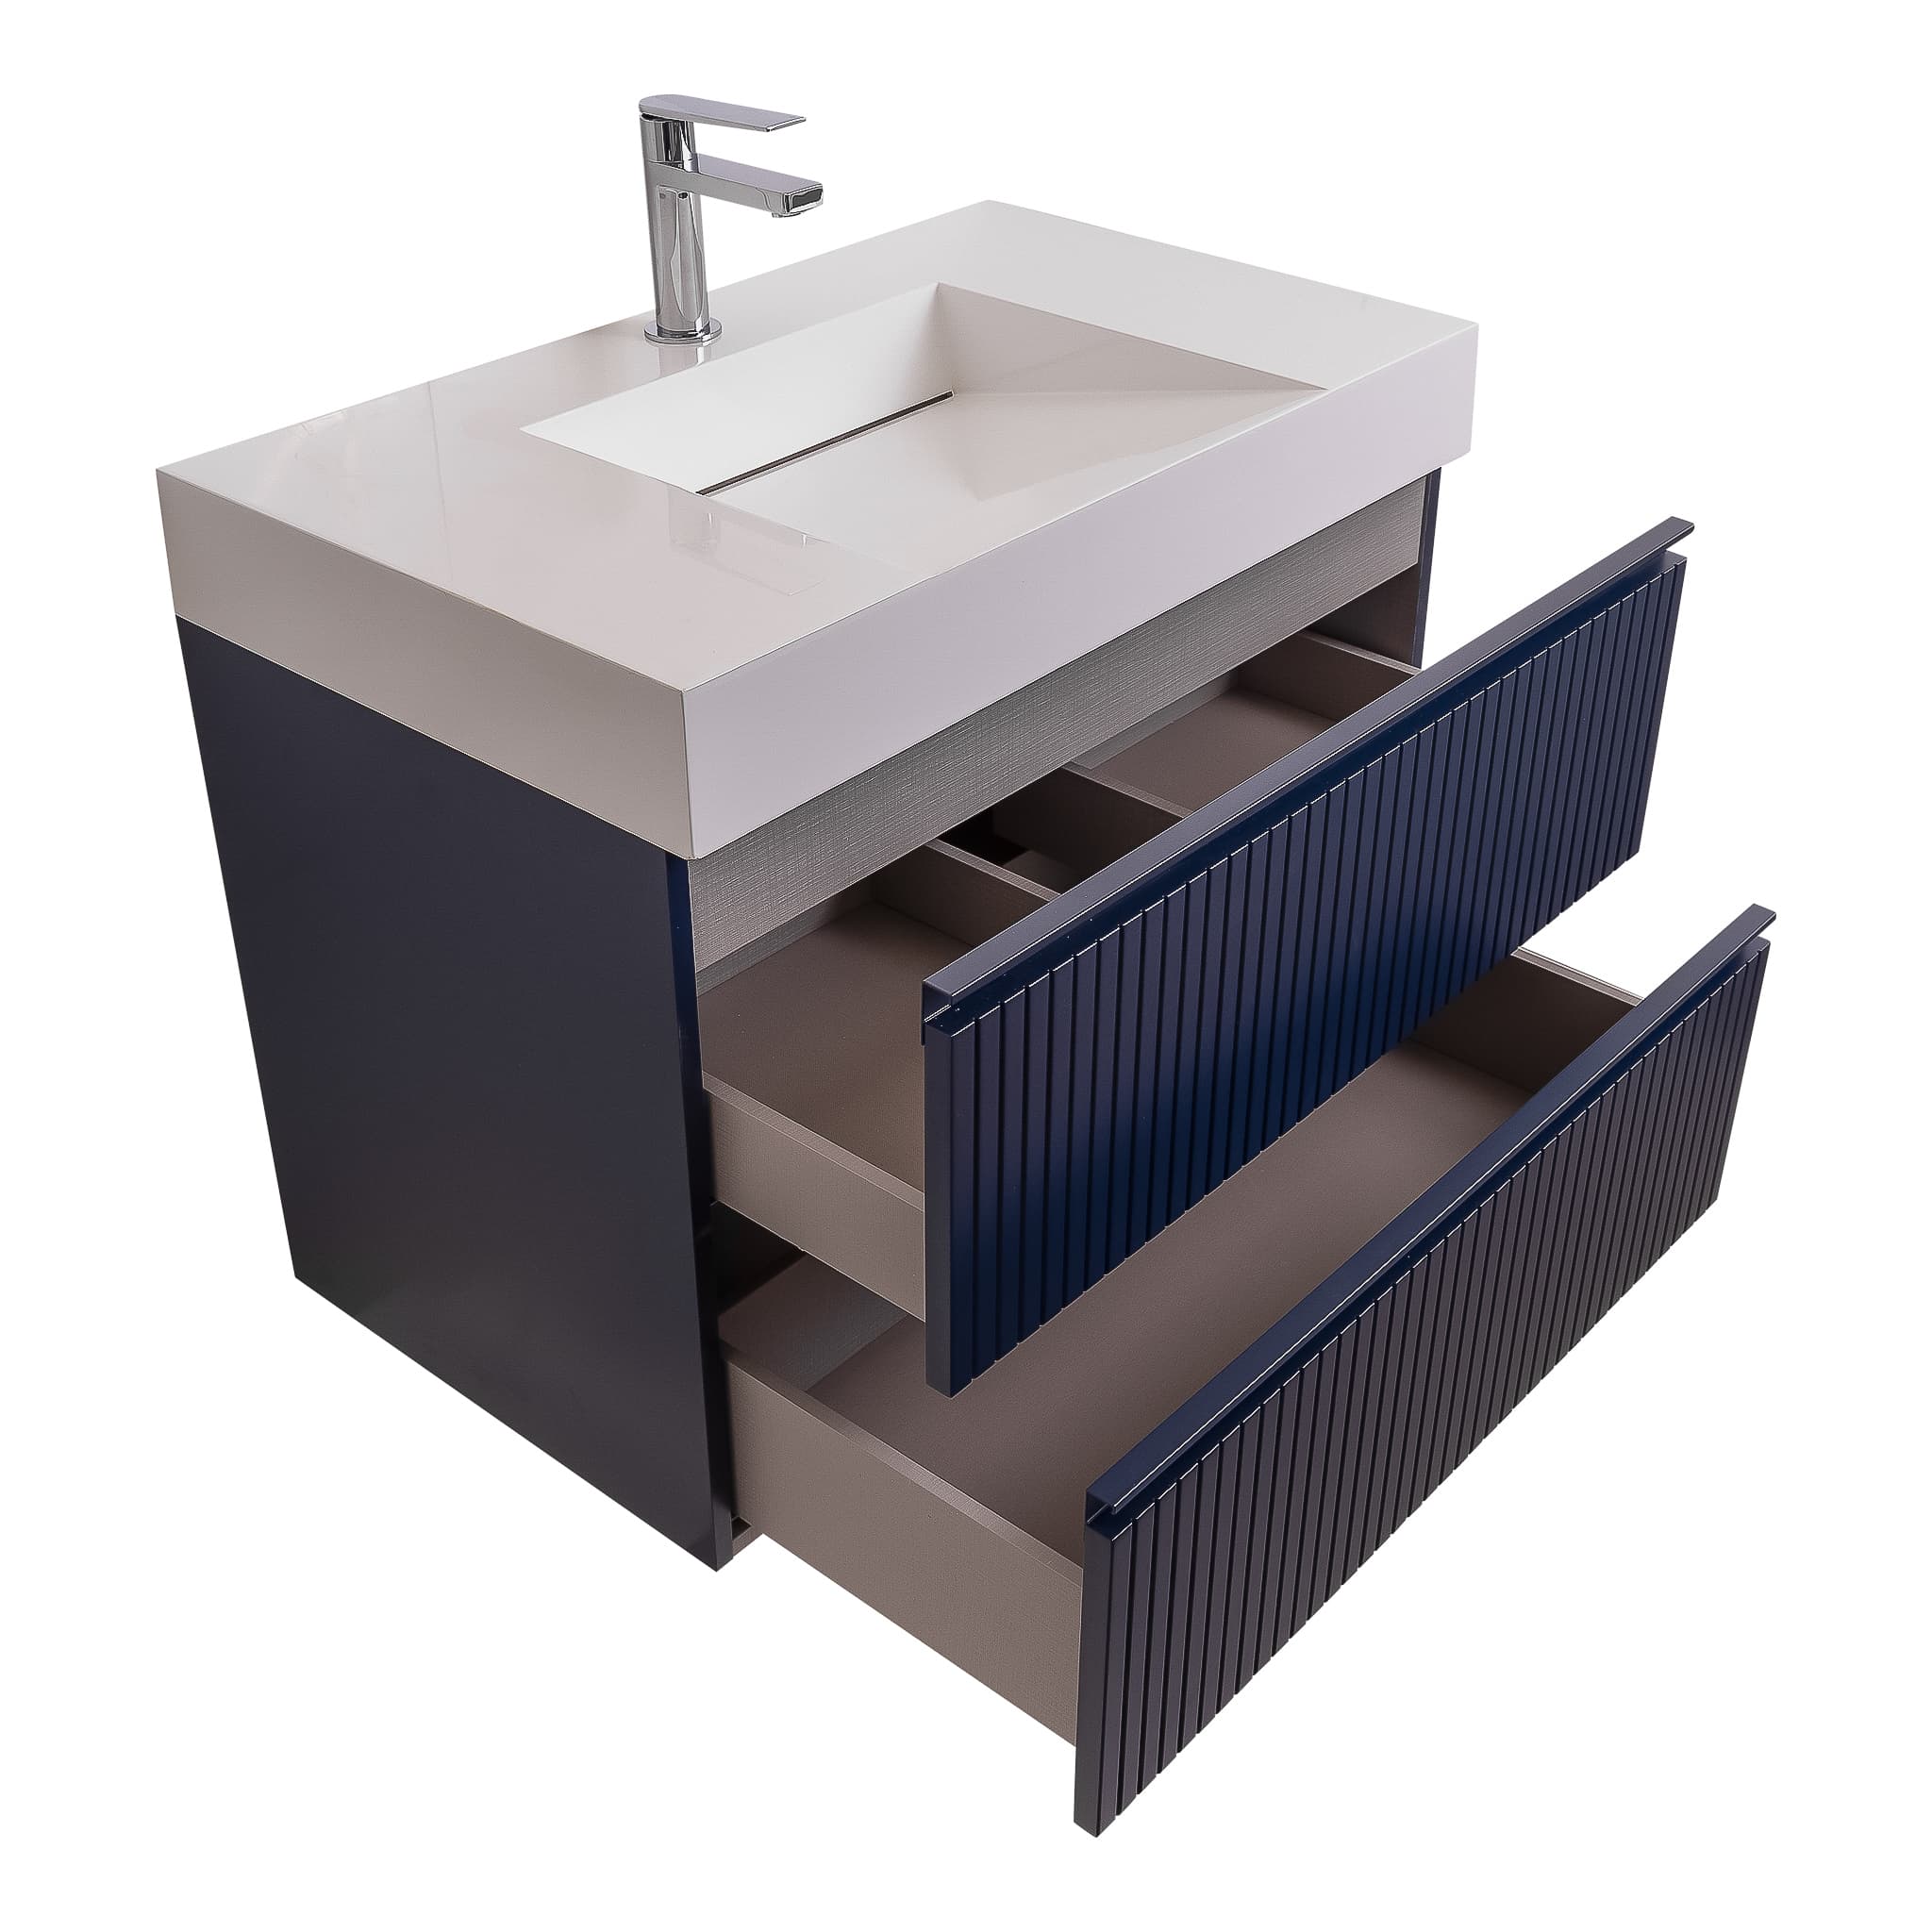 Ares 39.5 Matte Navy Blue Cabinet, Infinity Cultured Marble Sink, Wall Mounted Modern Vanity Set